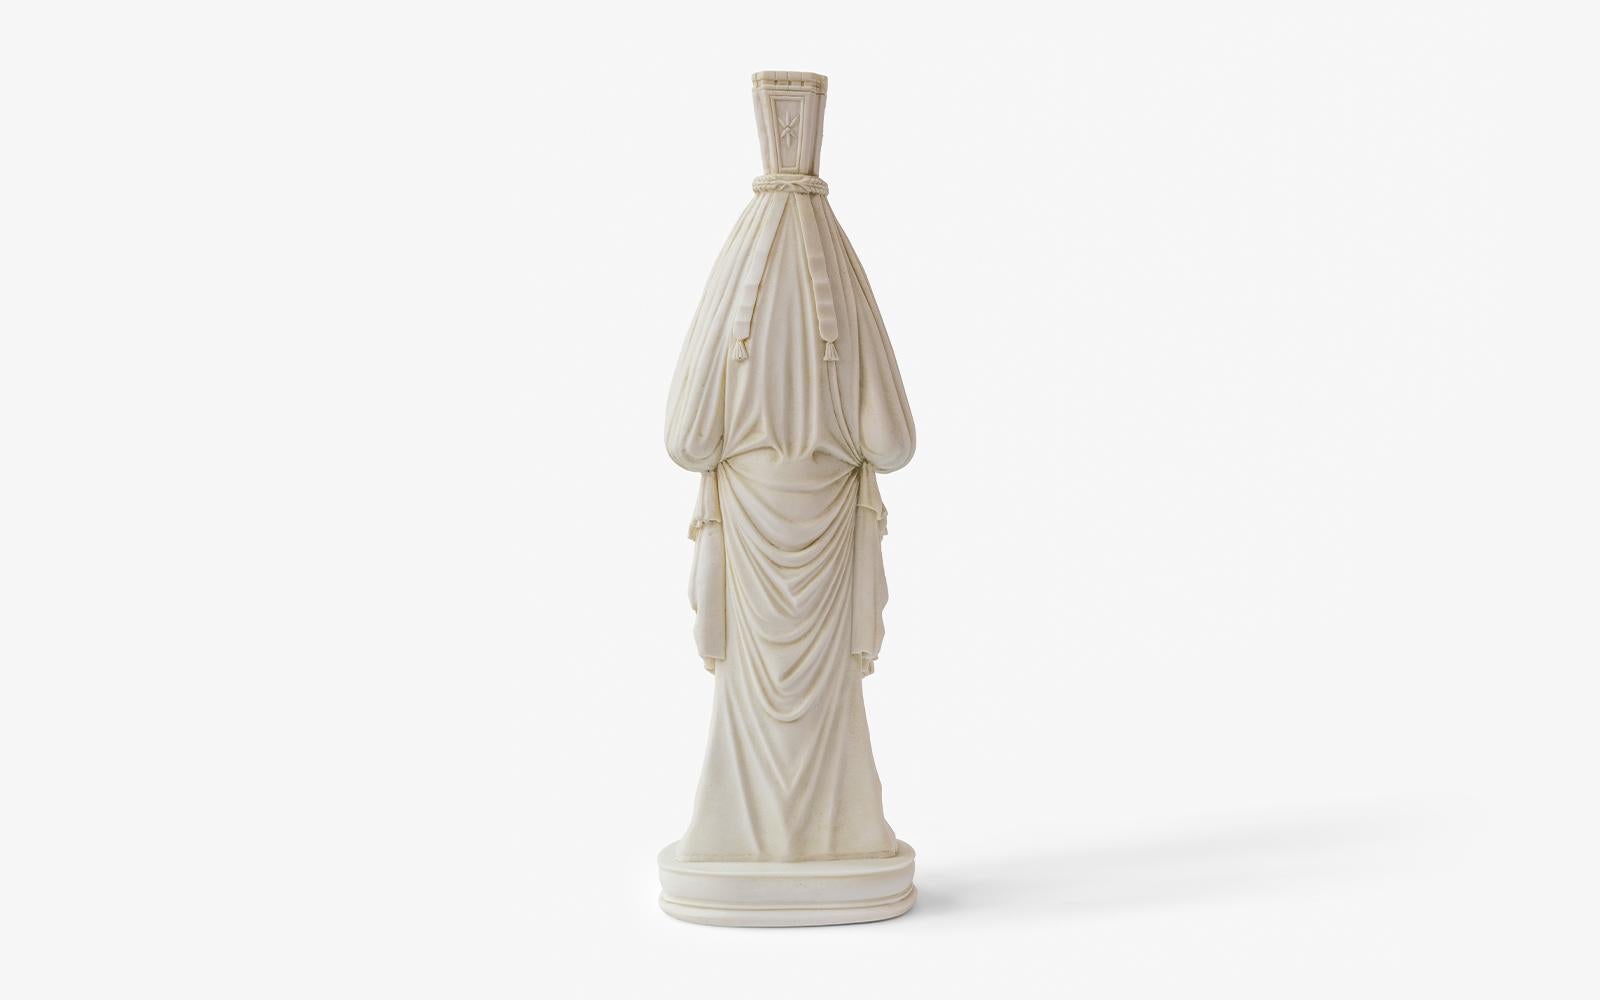 Measures: Height: 23.6'' / Weight: 5 kg

Goddess with Classical and Hellenistic concepts of Aphrodite. It was built for the sanctuary of the settlement in the Hellenistic period. She is depicted standing upright and from the front, like an ancient